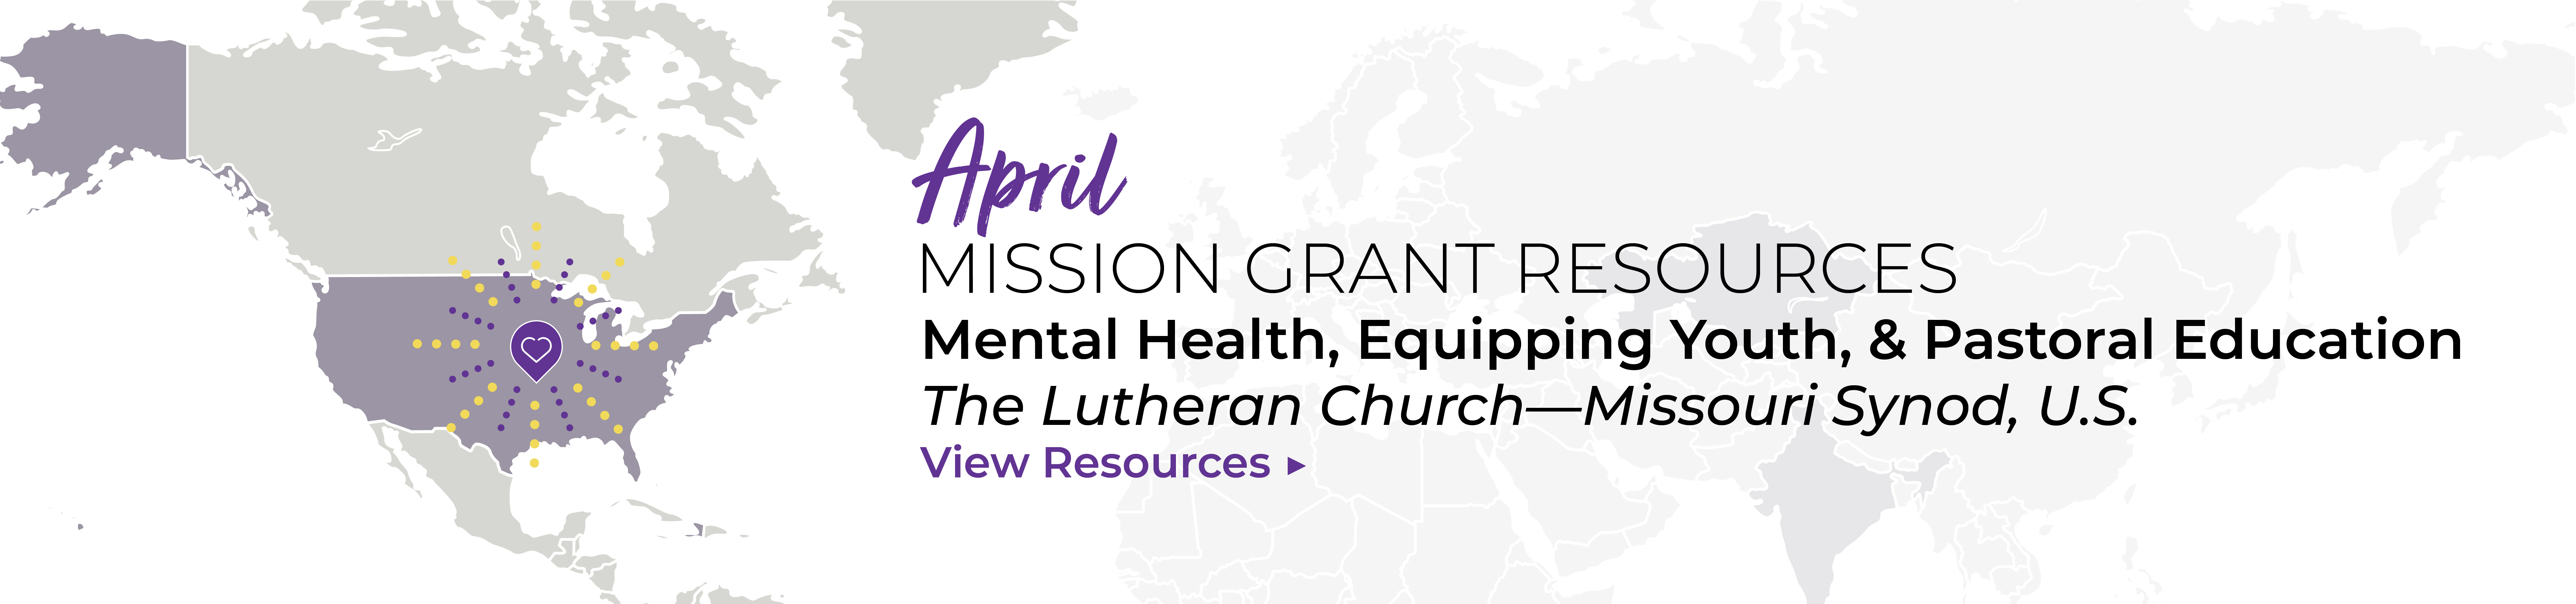 April Mission Grant Resources: Mental Health, Equipping Youth, and Pastoral Education. View Resources.